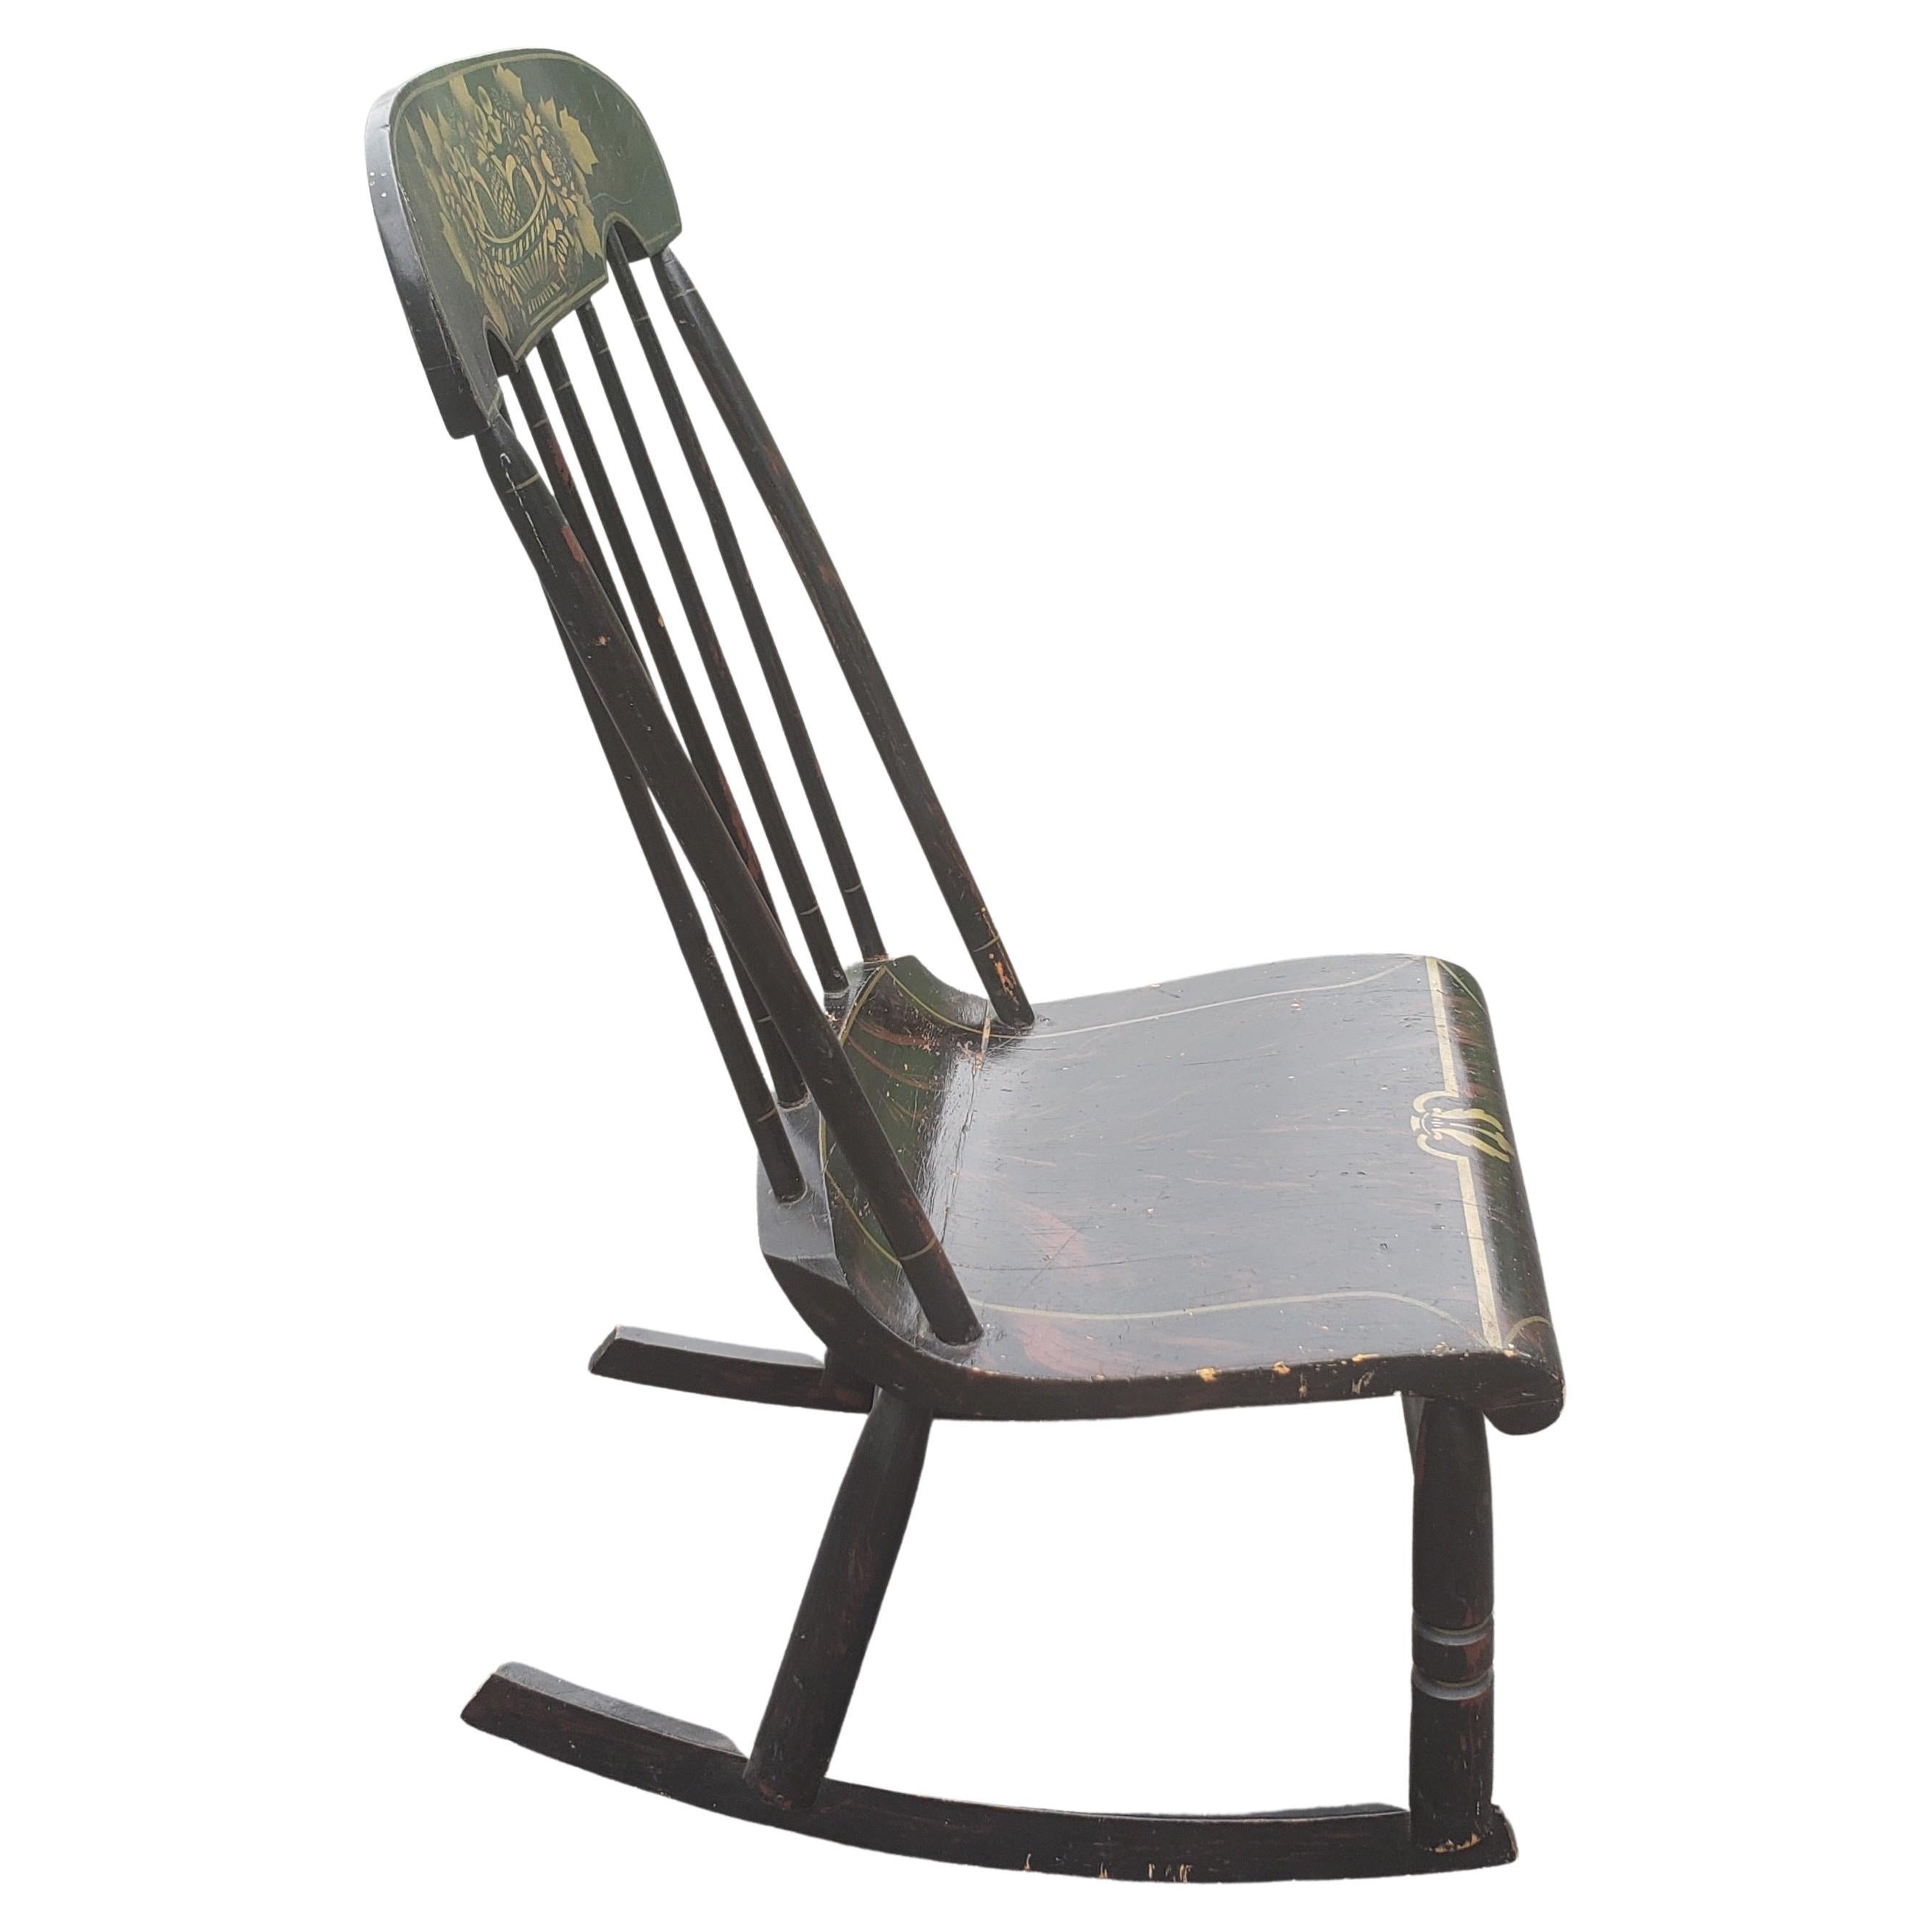 20th Century Antique New-York Style Ebonized Hand-Painted Rocker, Circa 1920s For Sale